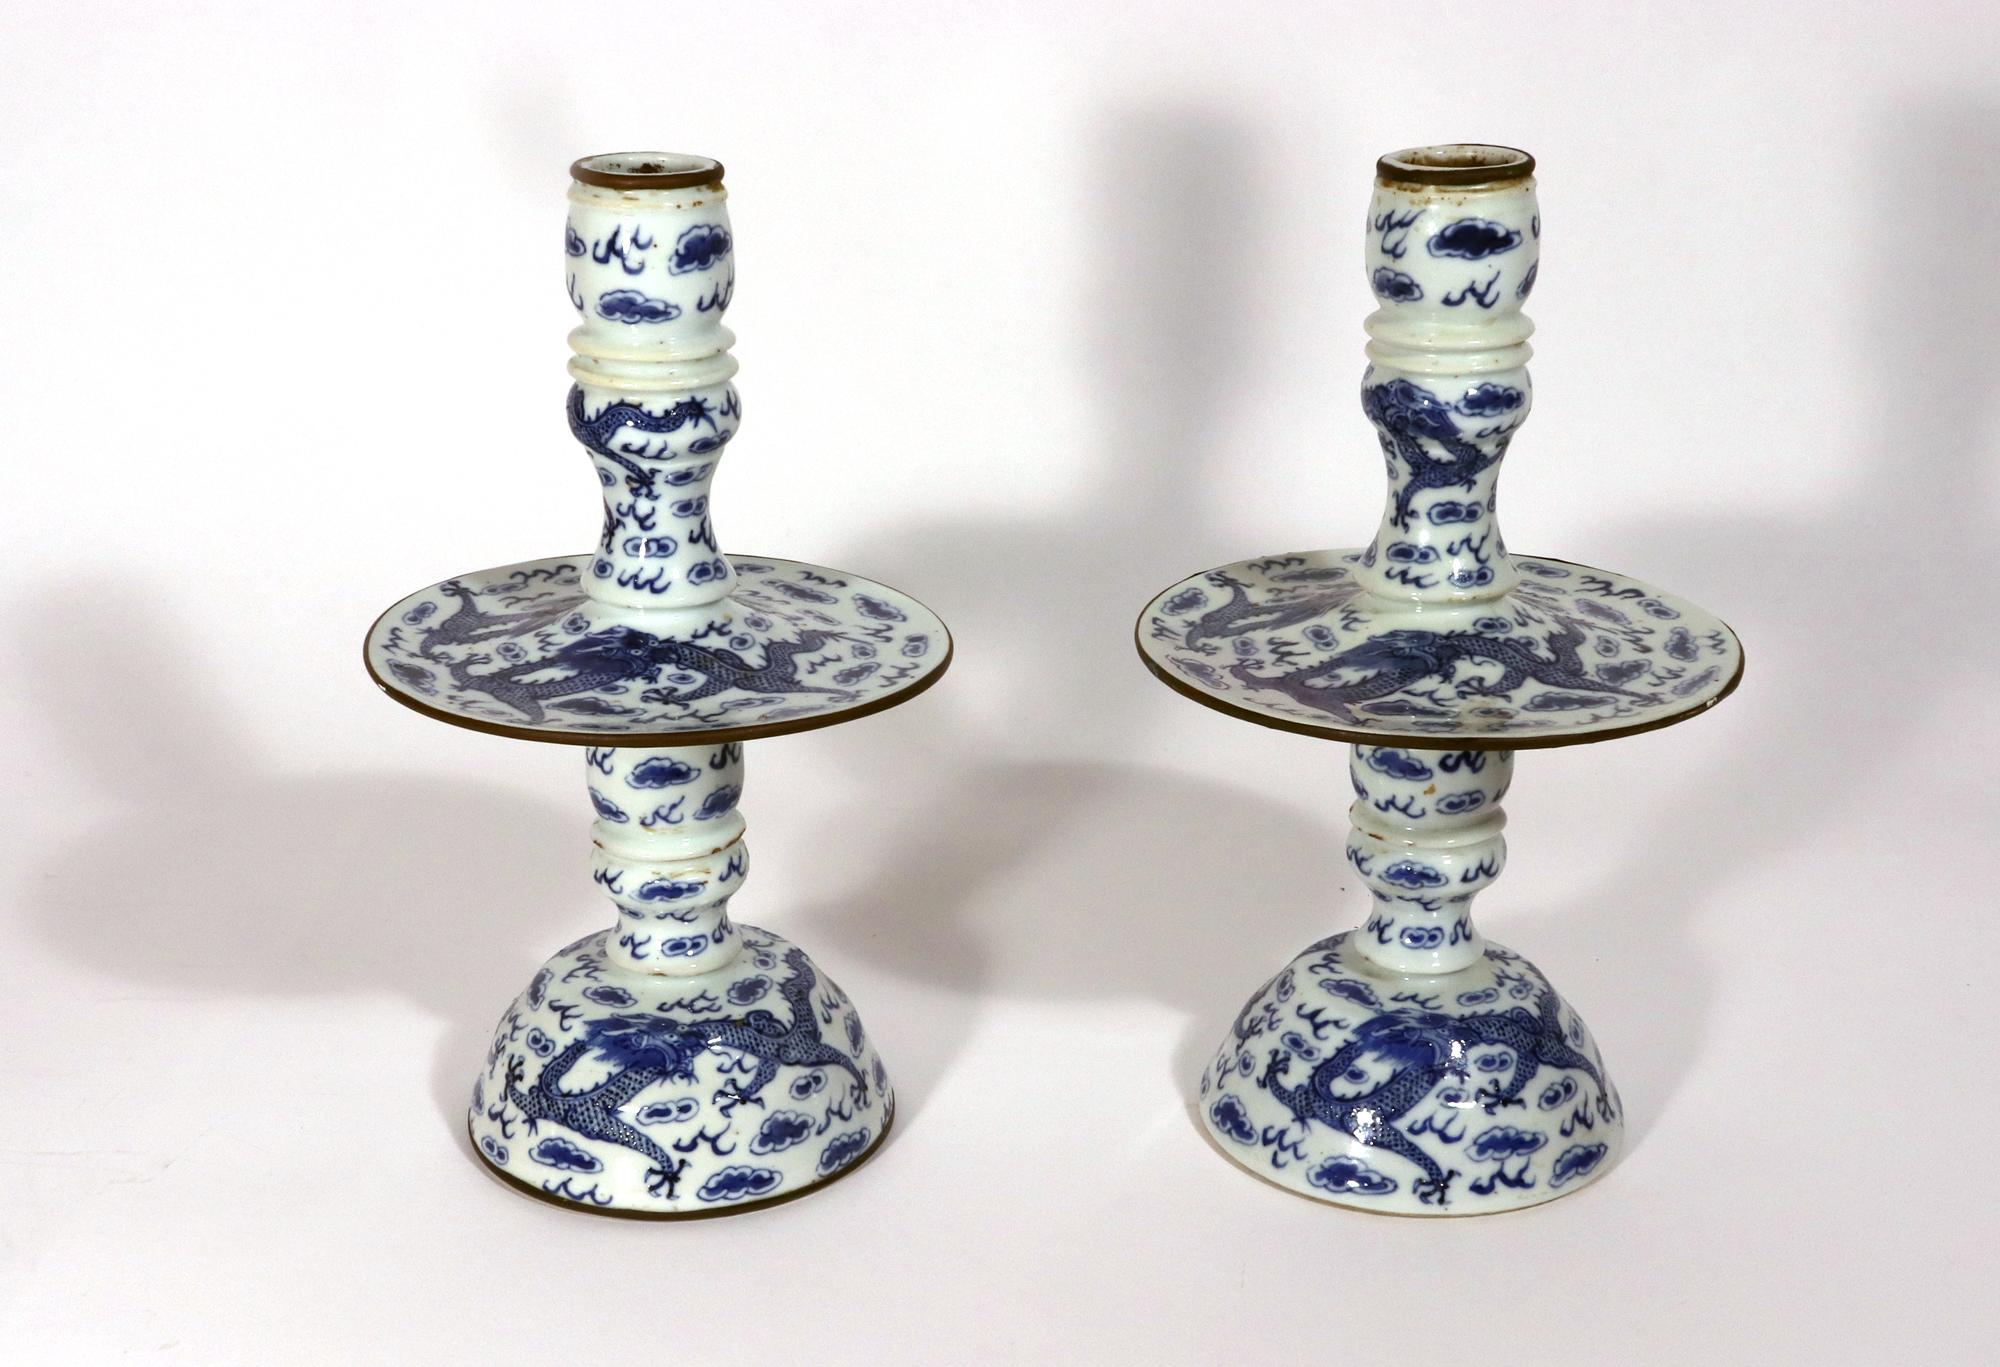 Chinese Export Porcelain Underglaze Blue Pair of Candlesticks,
Circa 1850-80

The pair of Chinese Export underglaze blue porcelain candlesticks have a circular domed petal-form base with the column with a central wide drip pan.  The whole painted